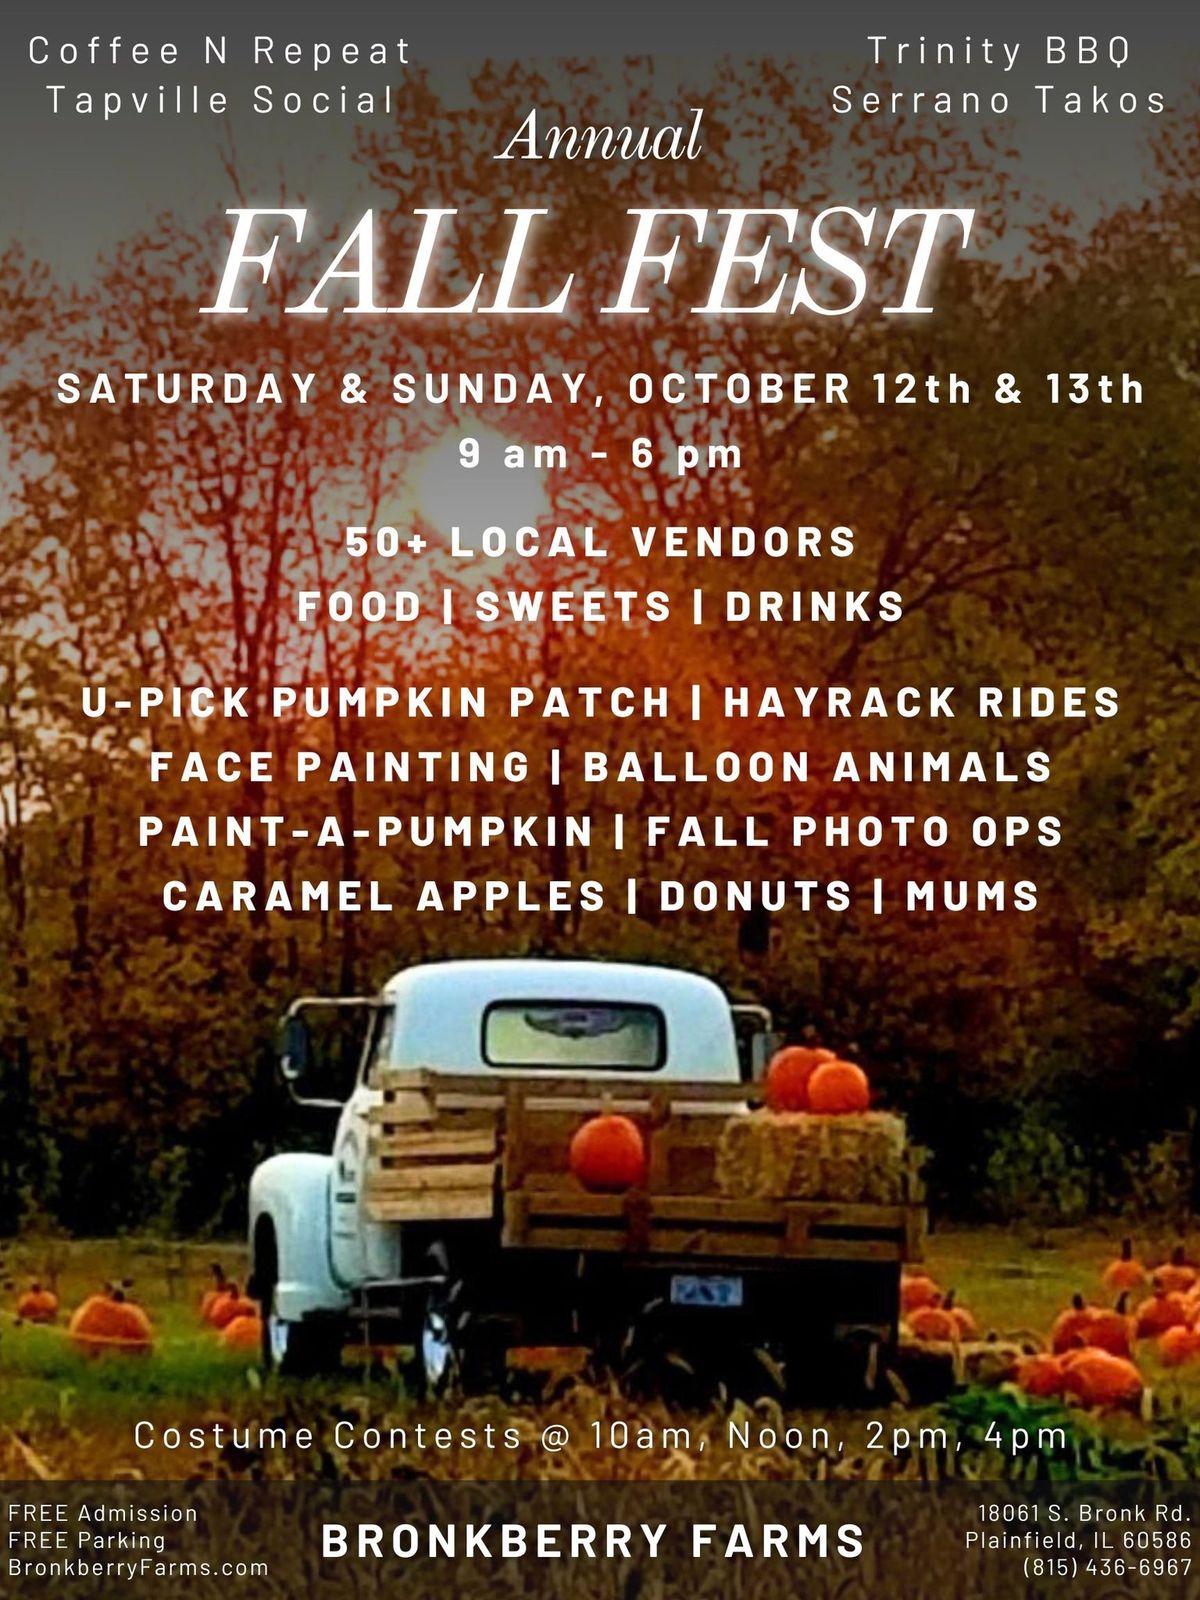 Annual Fall Fest - 2 Day Event